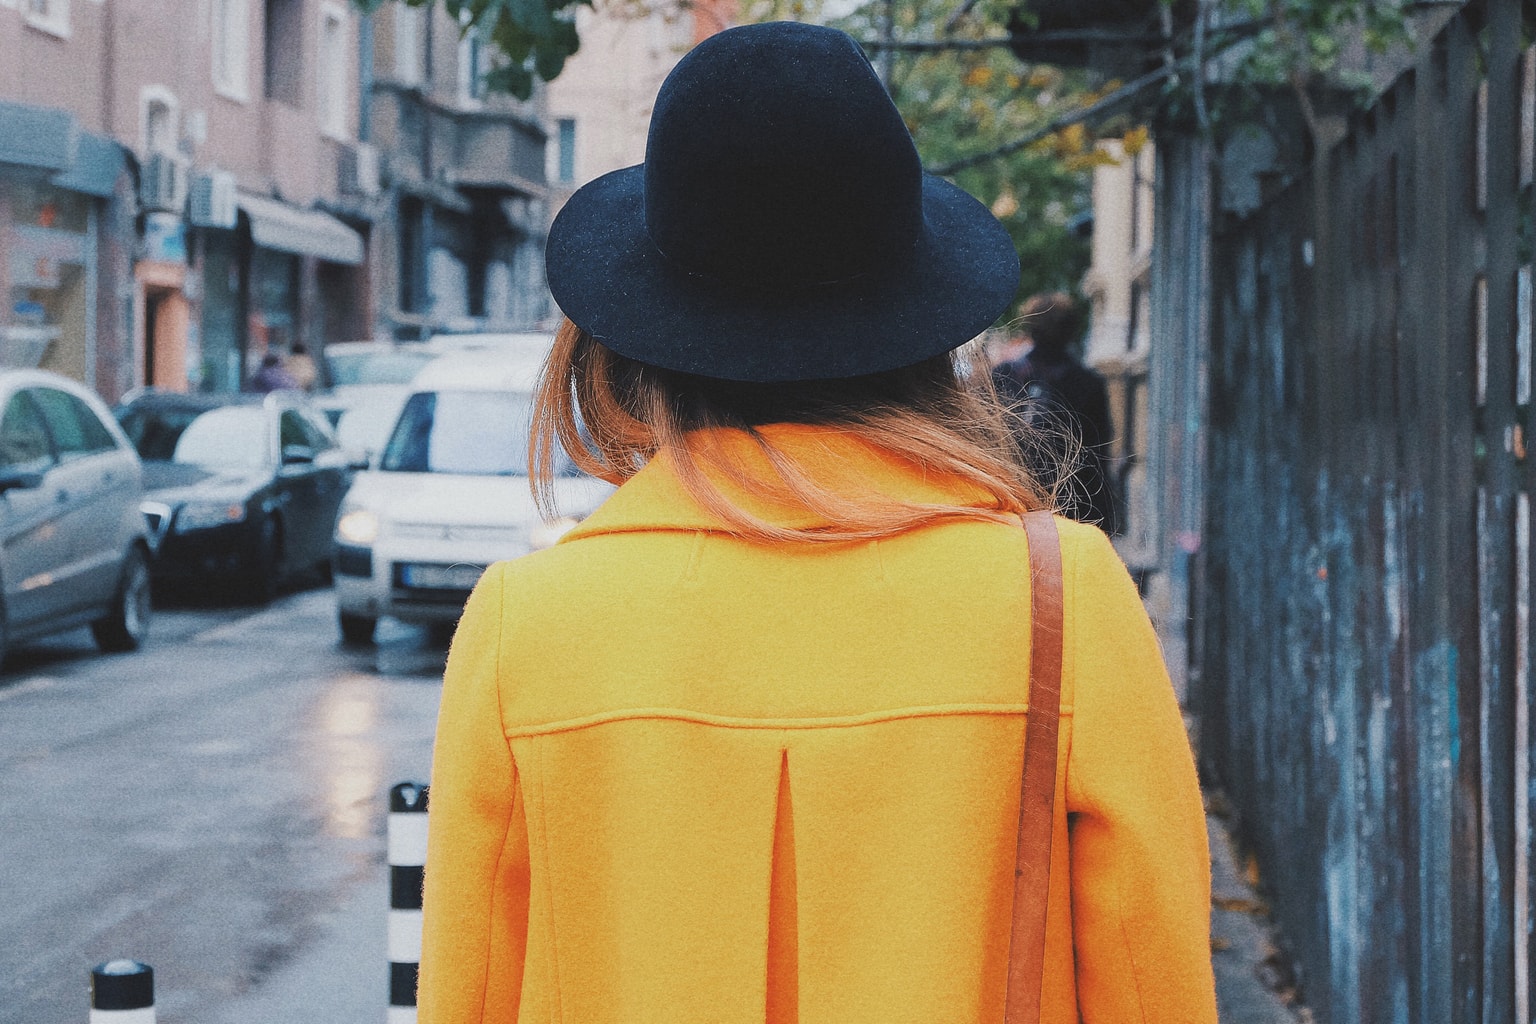 Woman wearing a yellow coat and black rounded hat